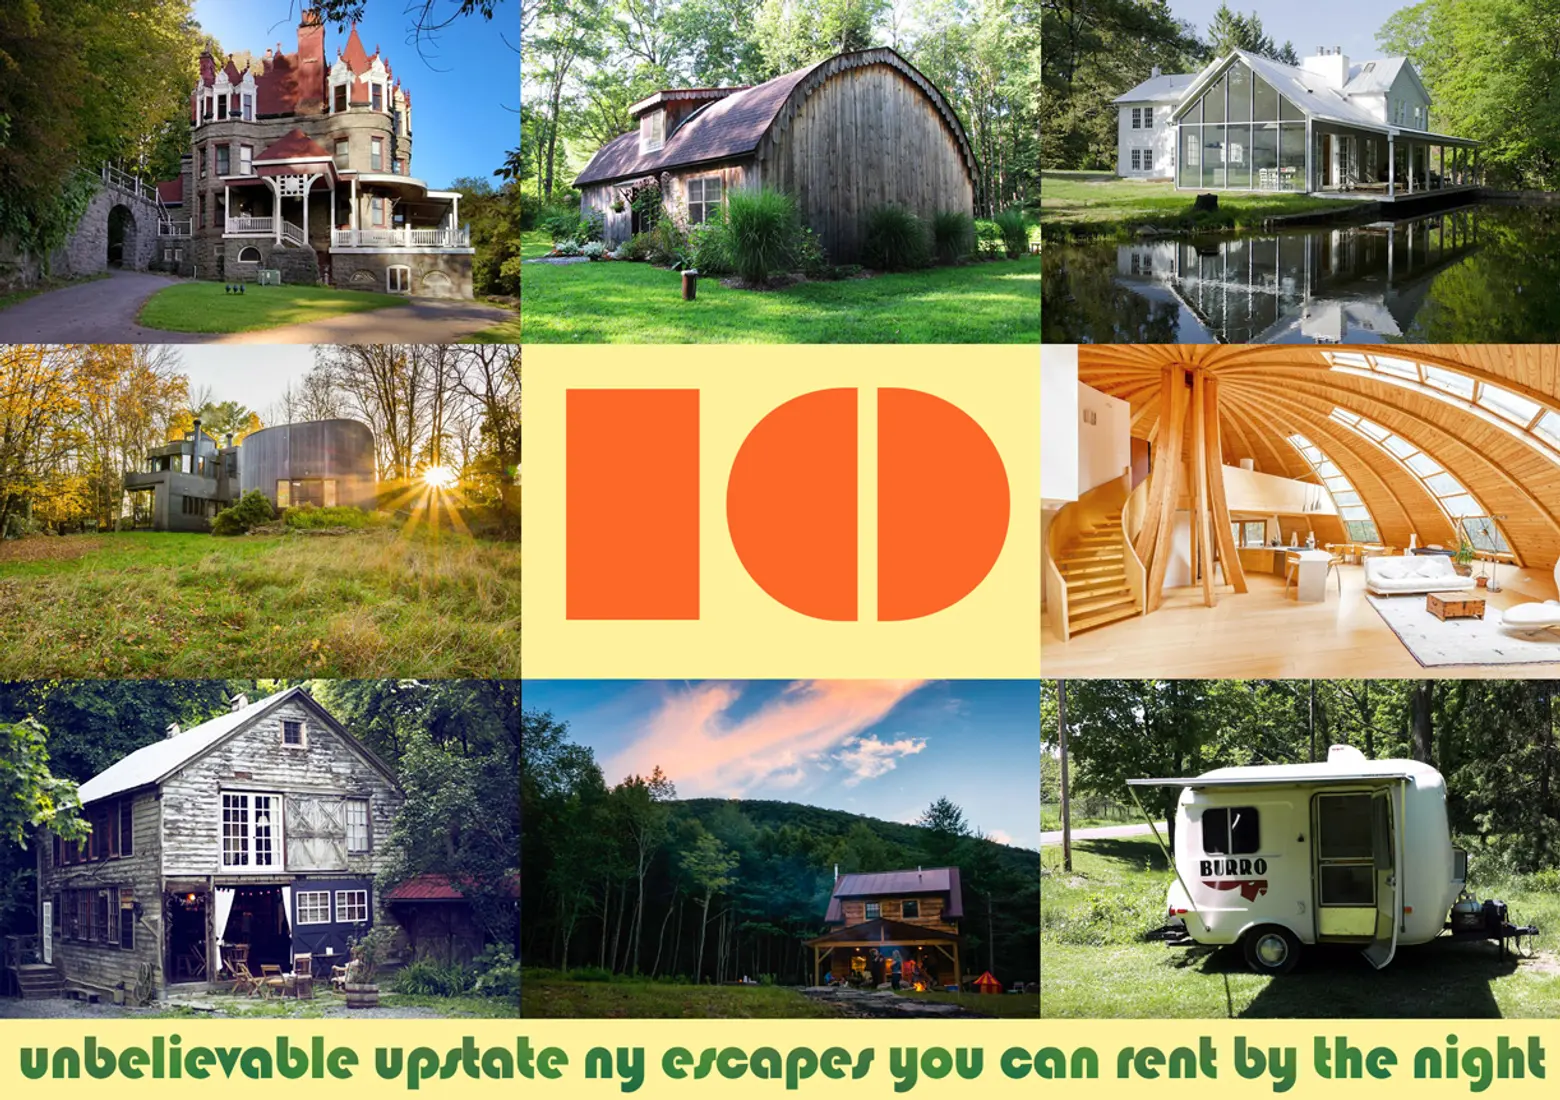 10 Unbelievable Upstate NY Escapes You Can Rent by the Night